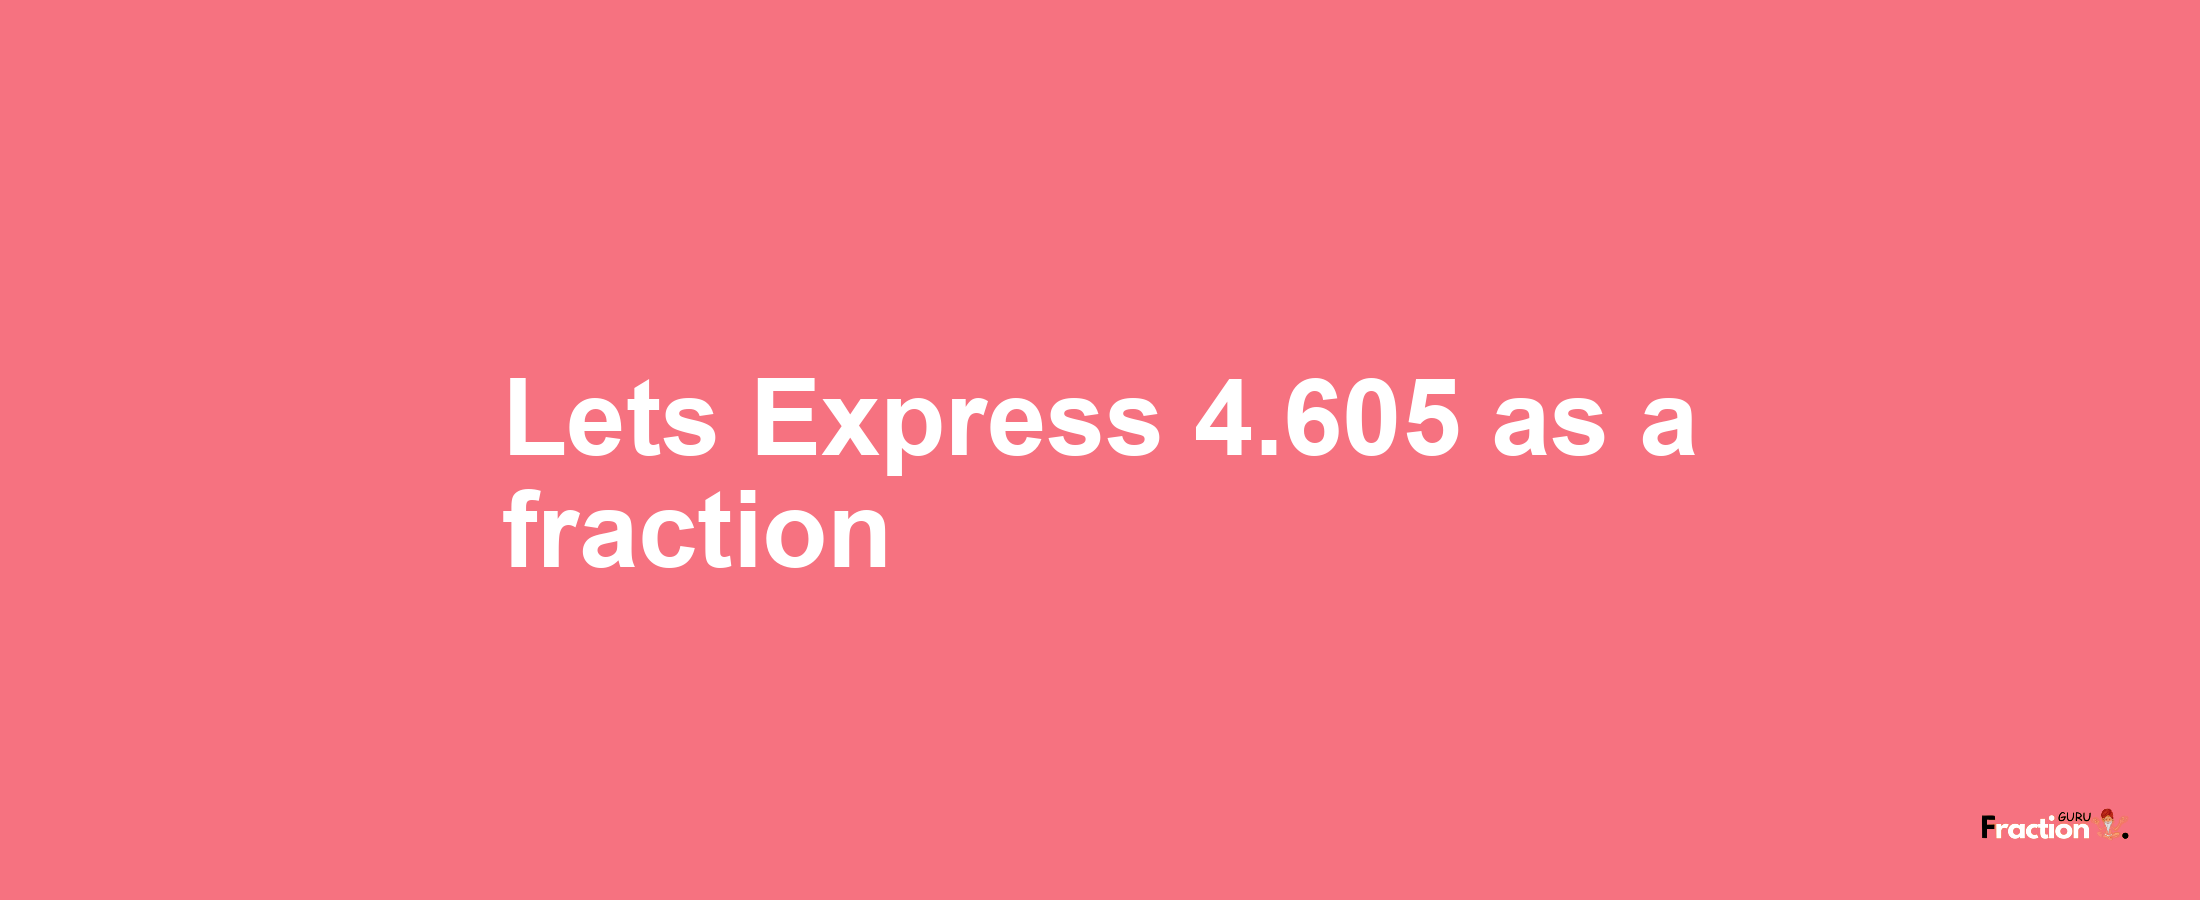 Lets Express 4.605 as afraction